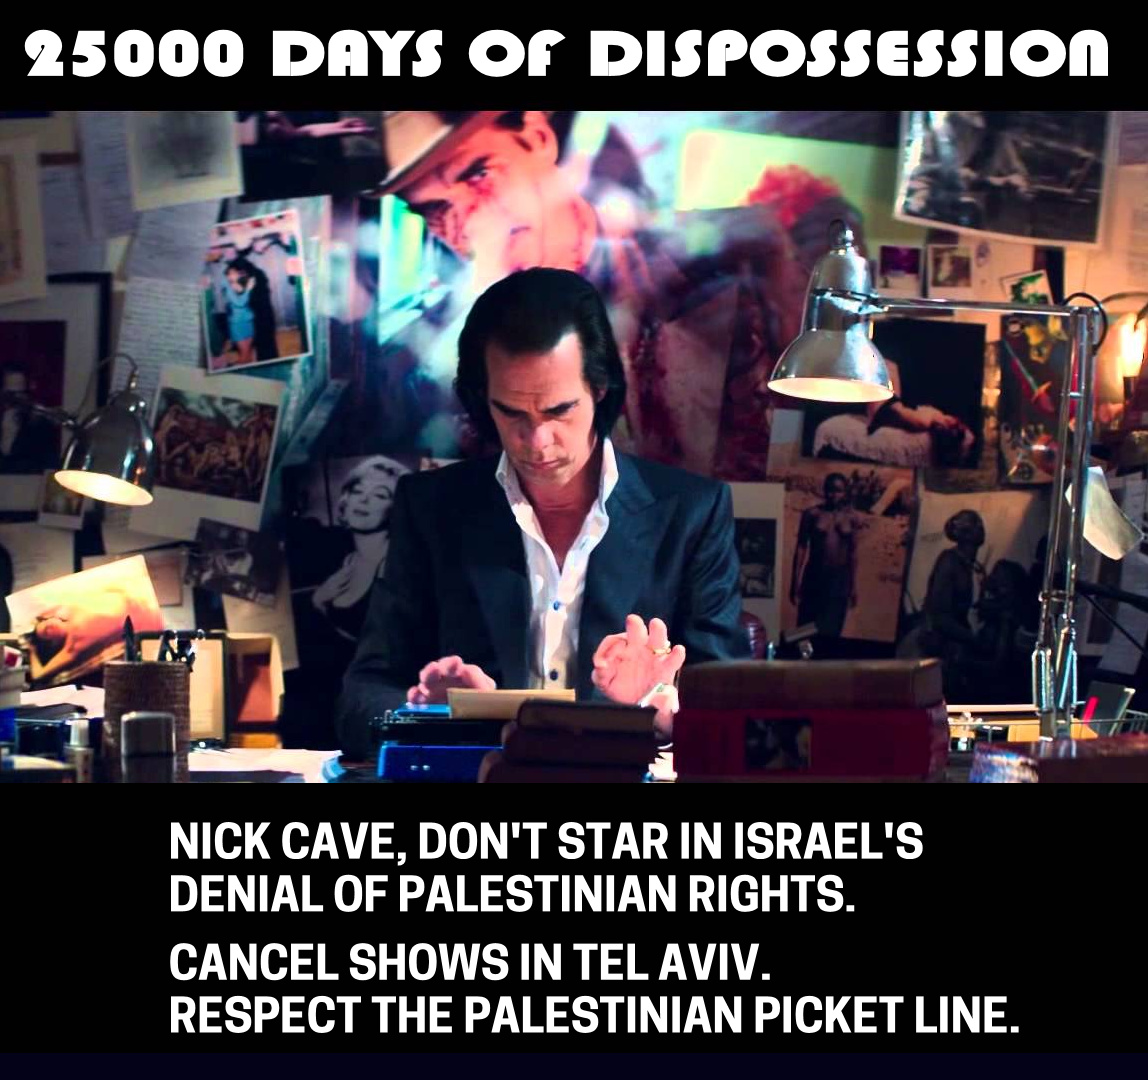 Palestinians to Nick Cave: Heed our non-violent call for justice | BDS ...